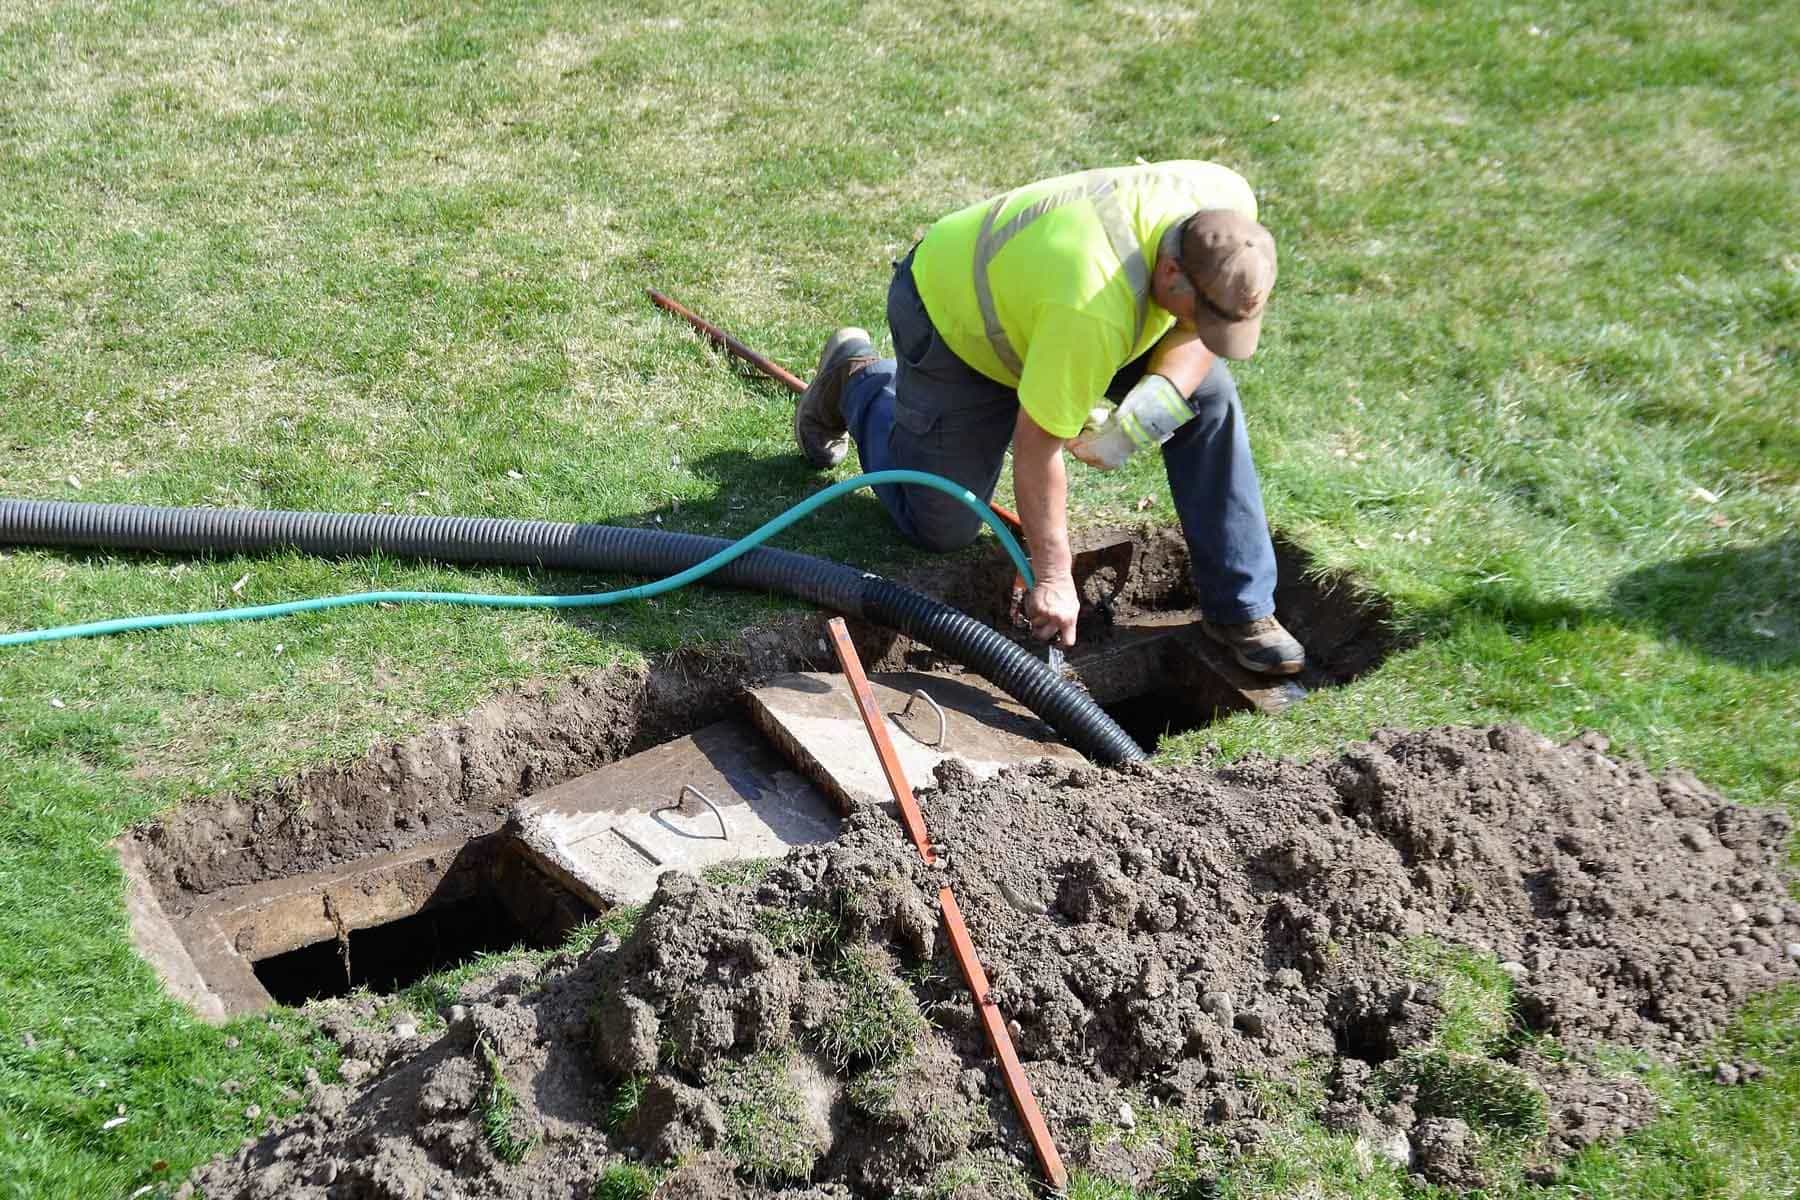 Who Pays For Septic Inspection: Buyer Or Seller?